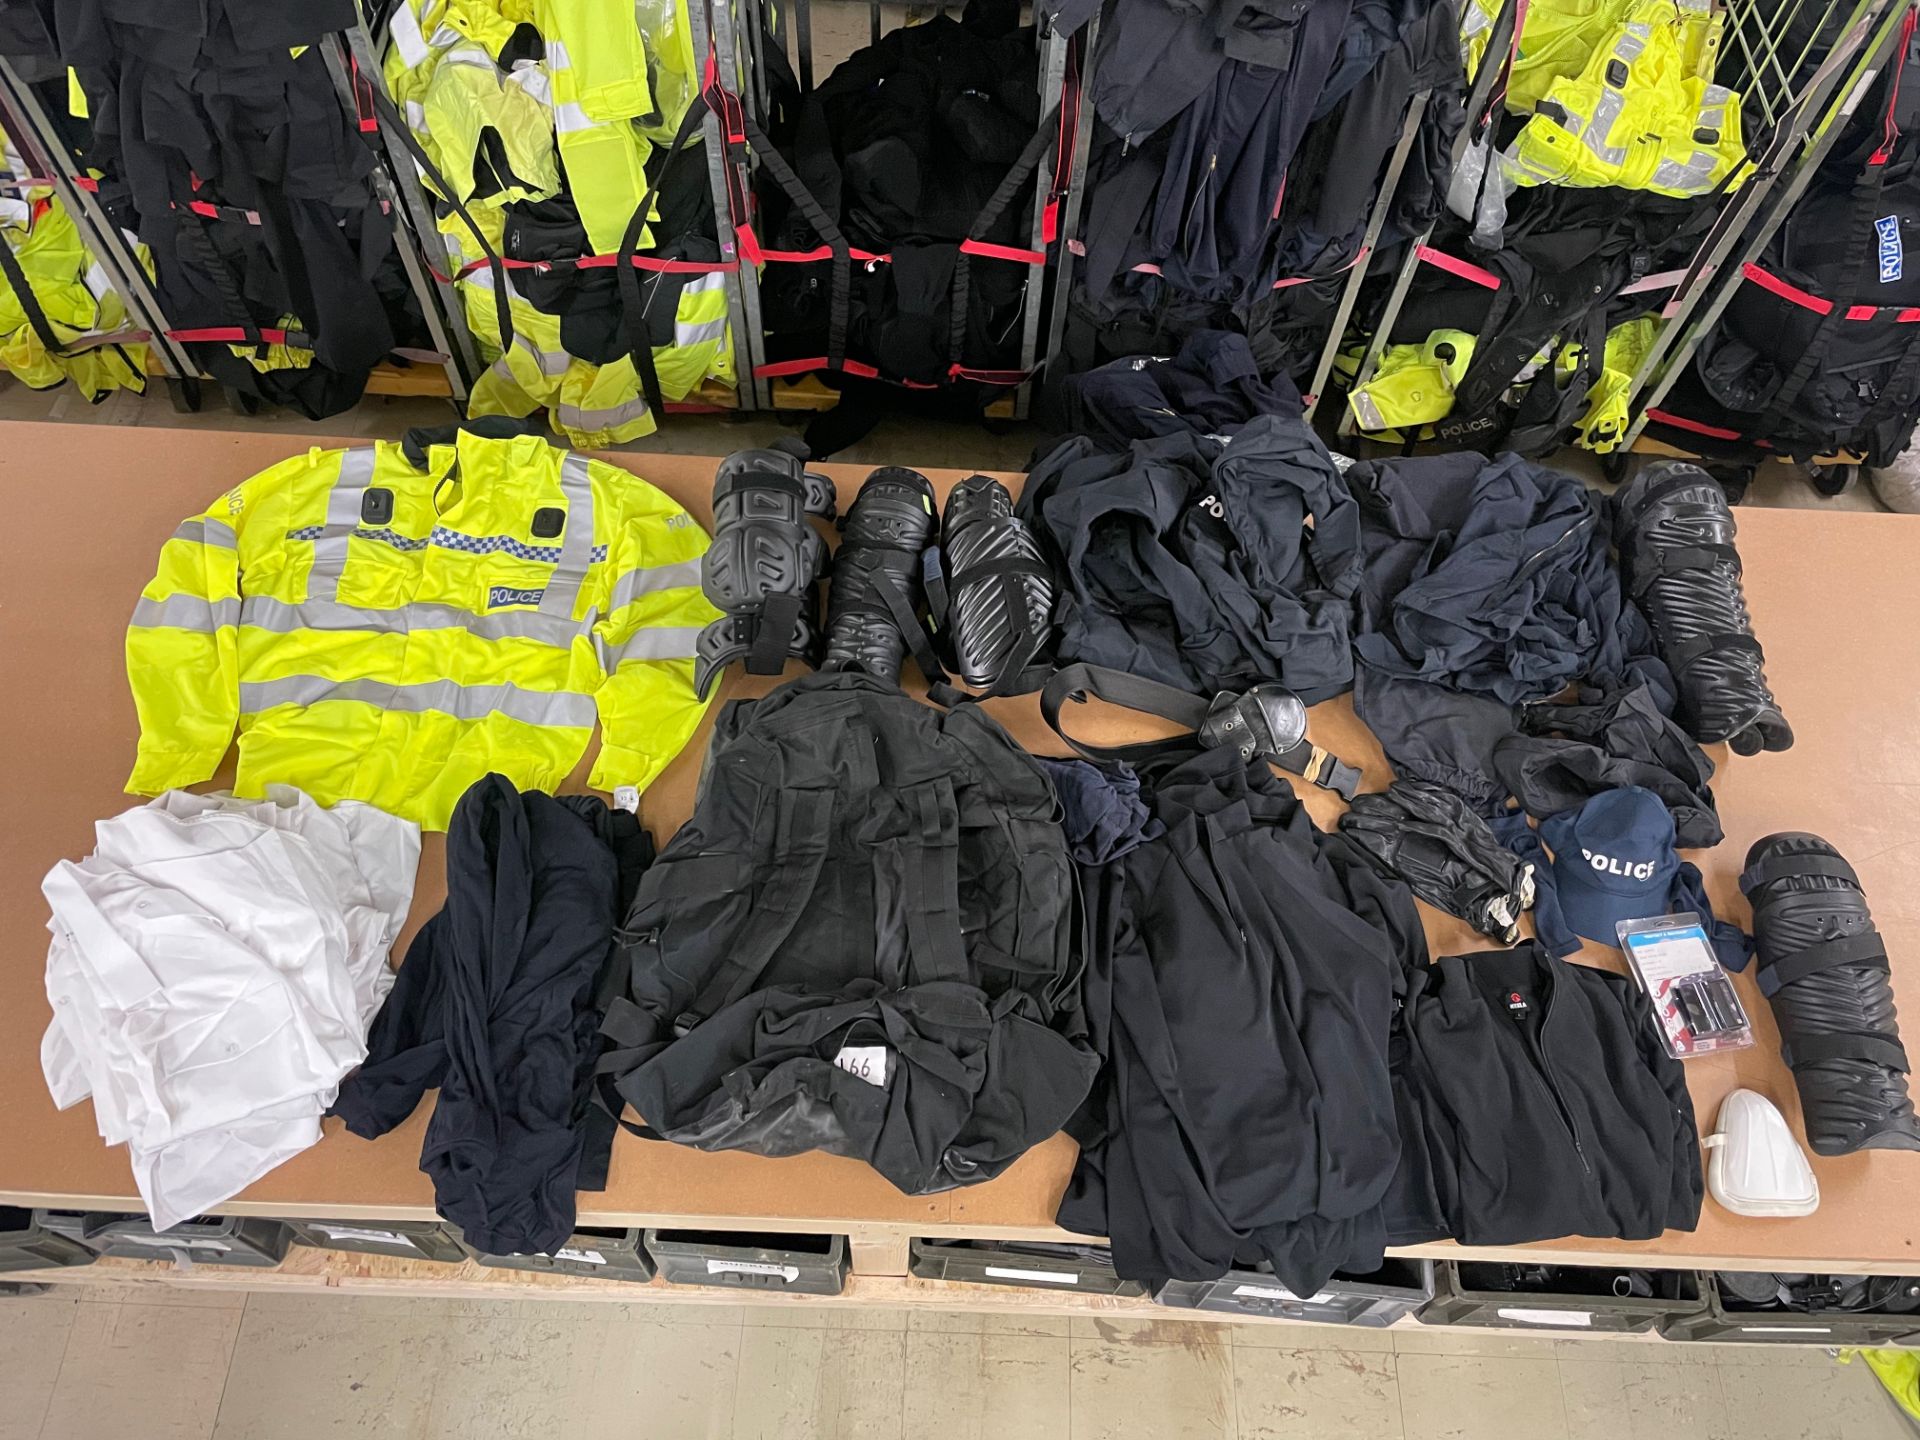 5 X BAGS EX POLICE CLOTHING & ACCESSORIES - RRP £1375.00 - Image 11 of 12